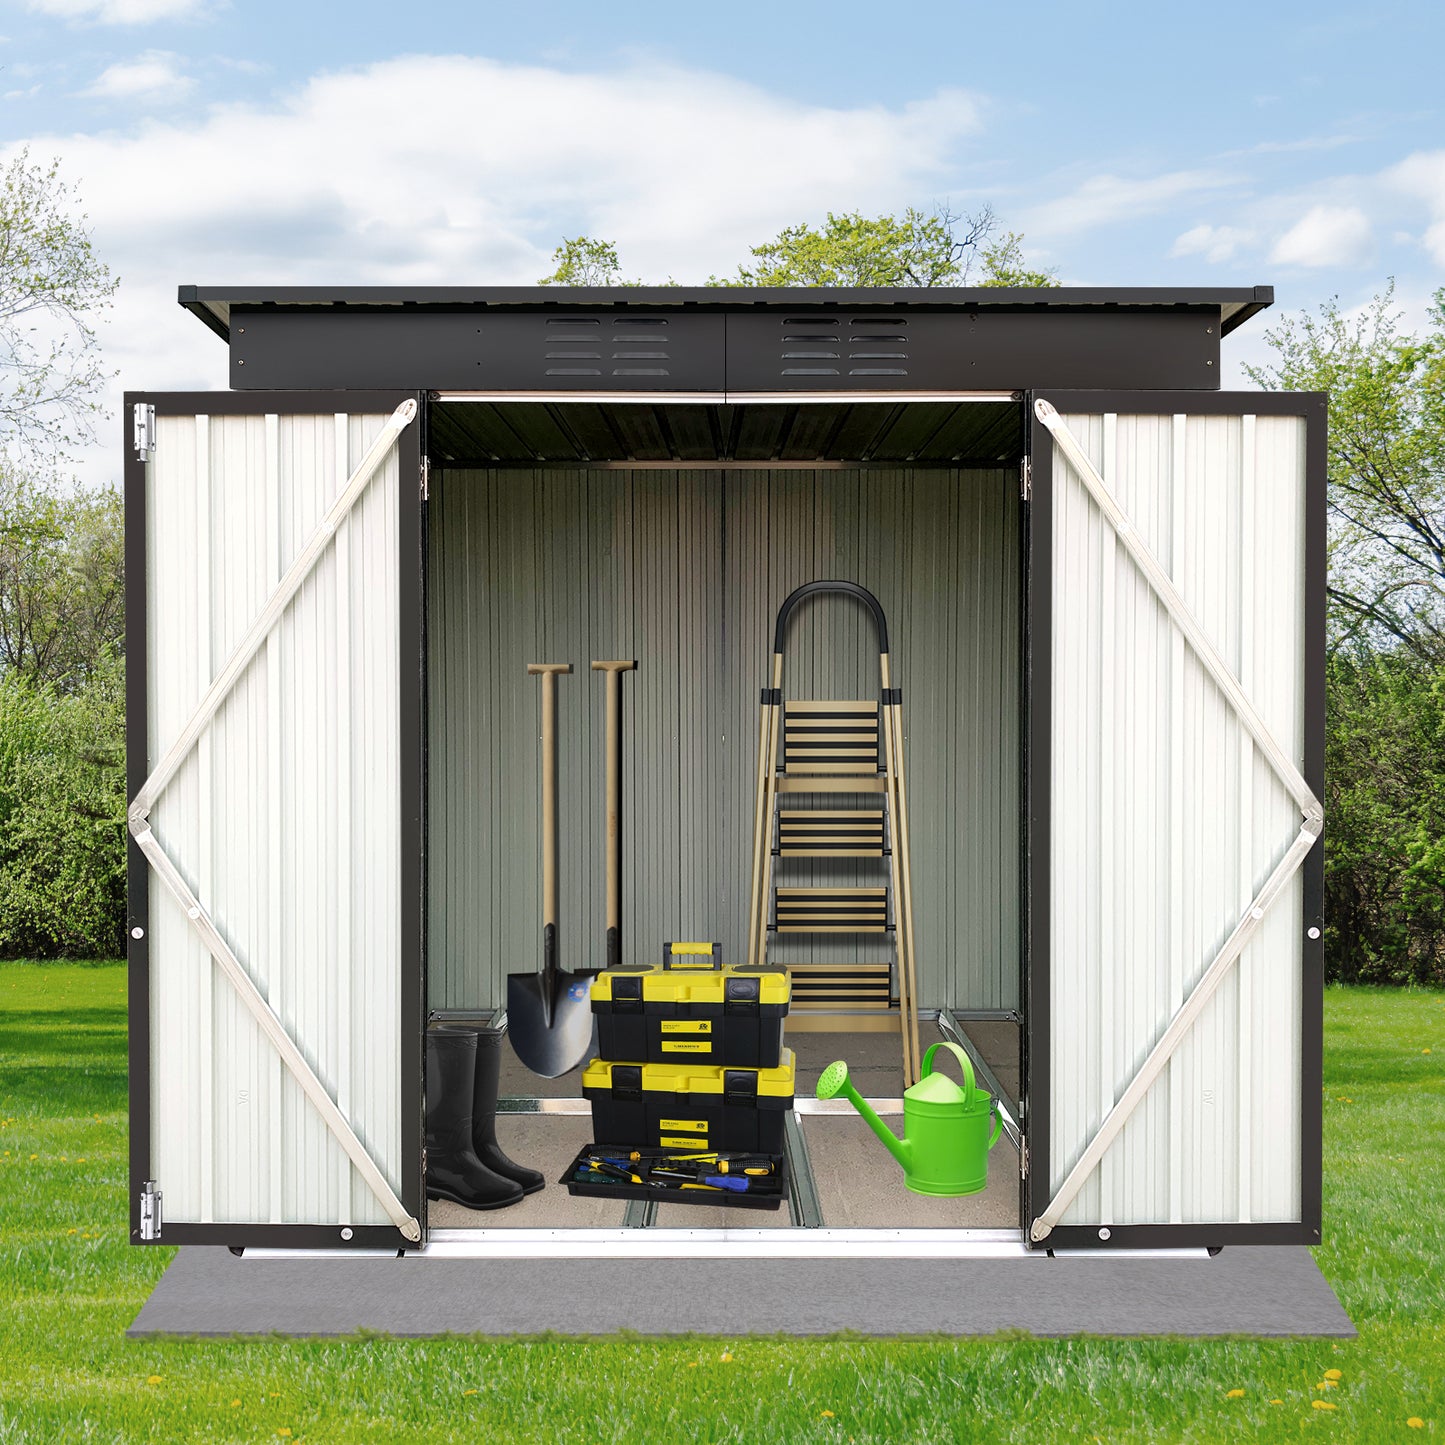 5' x 3' Outdoor Metal Storage Shed, Garden Shed for Tools, Trash Can, Storage Shed with Single Lockable Door, for Backyard, Patio, Lawn, C29